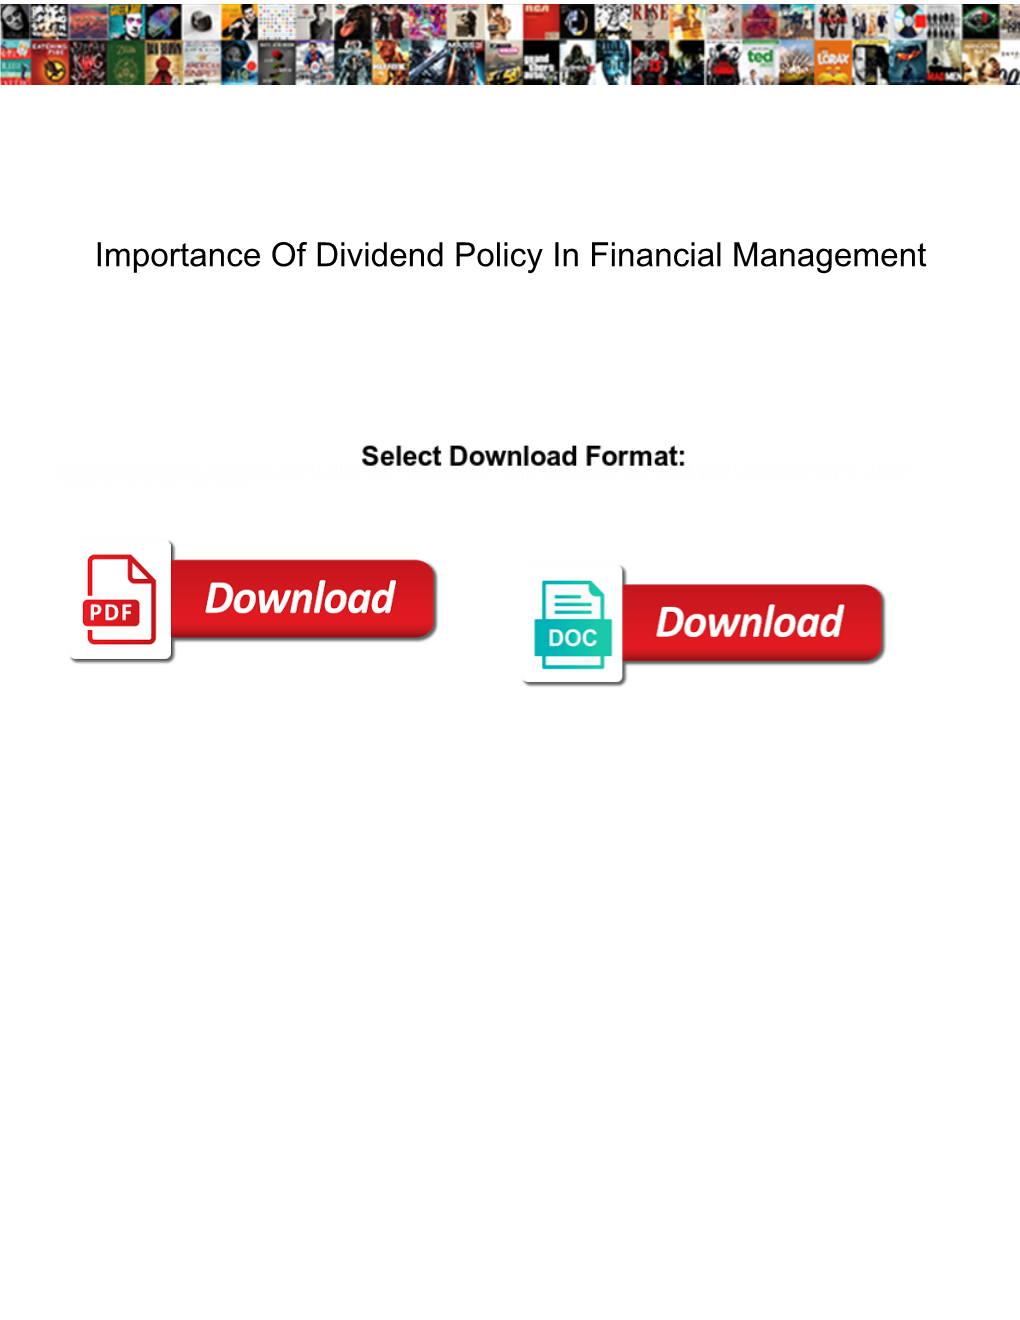 Importance of Dividend Policy in Financial Management